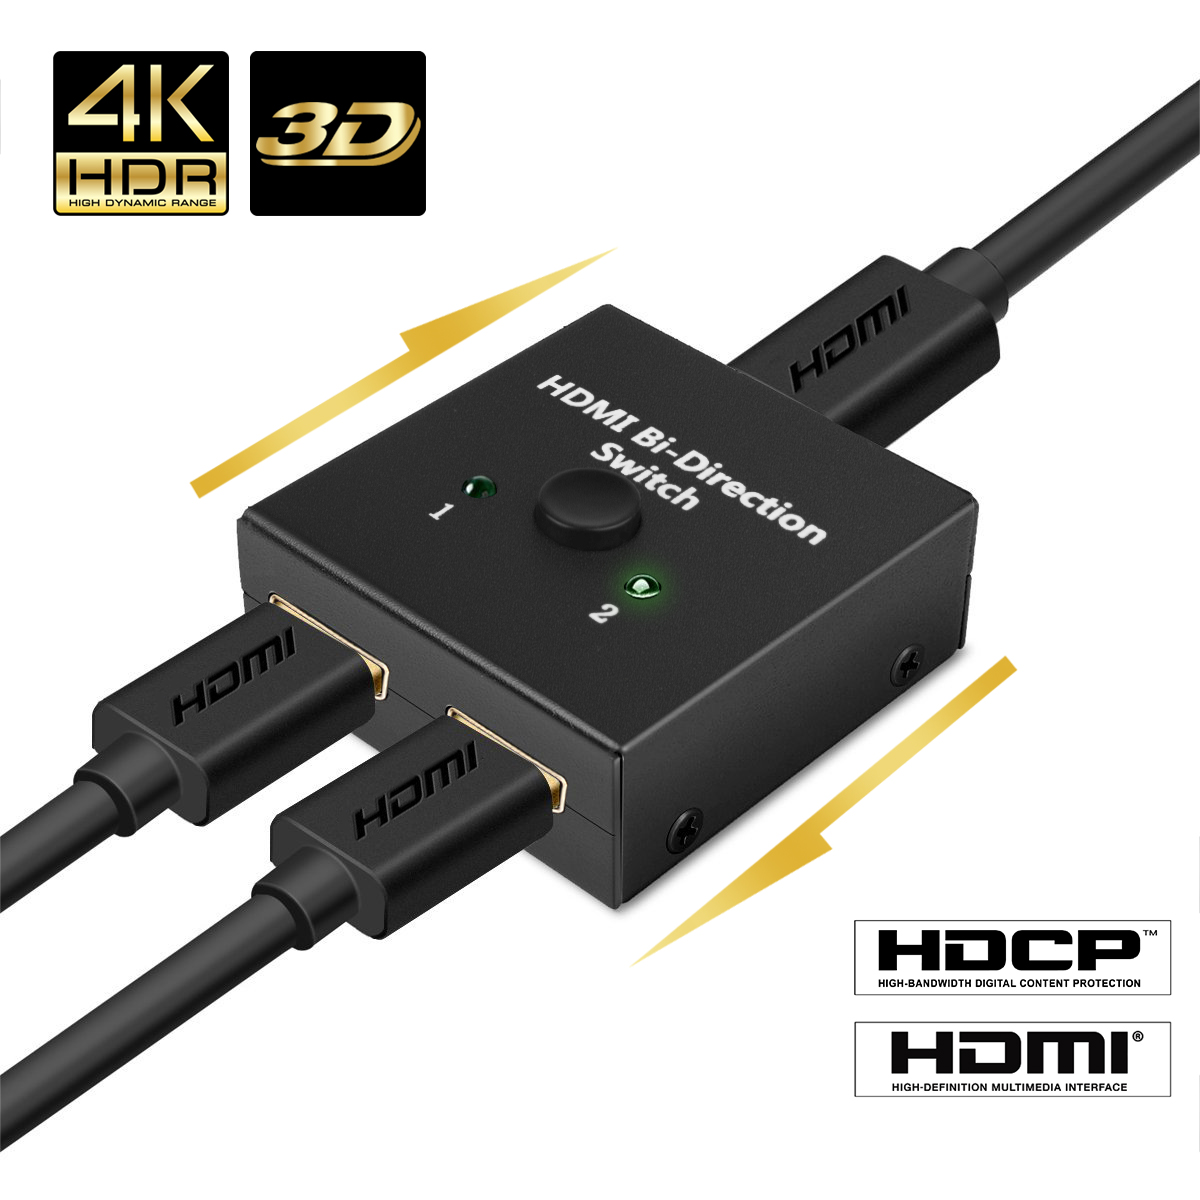 Hdmi Splitter NIERBO 1x2 Powered 4K splitter Dual Monitor 1 in 2 out 2 in 1 out HDMI 4Kx2K@30HZ Duplicating Video and Audio for Full